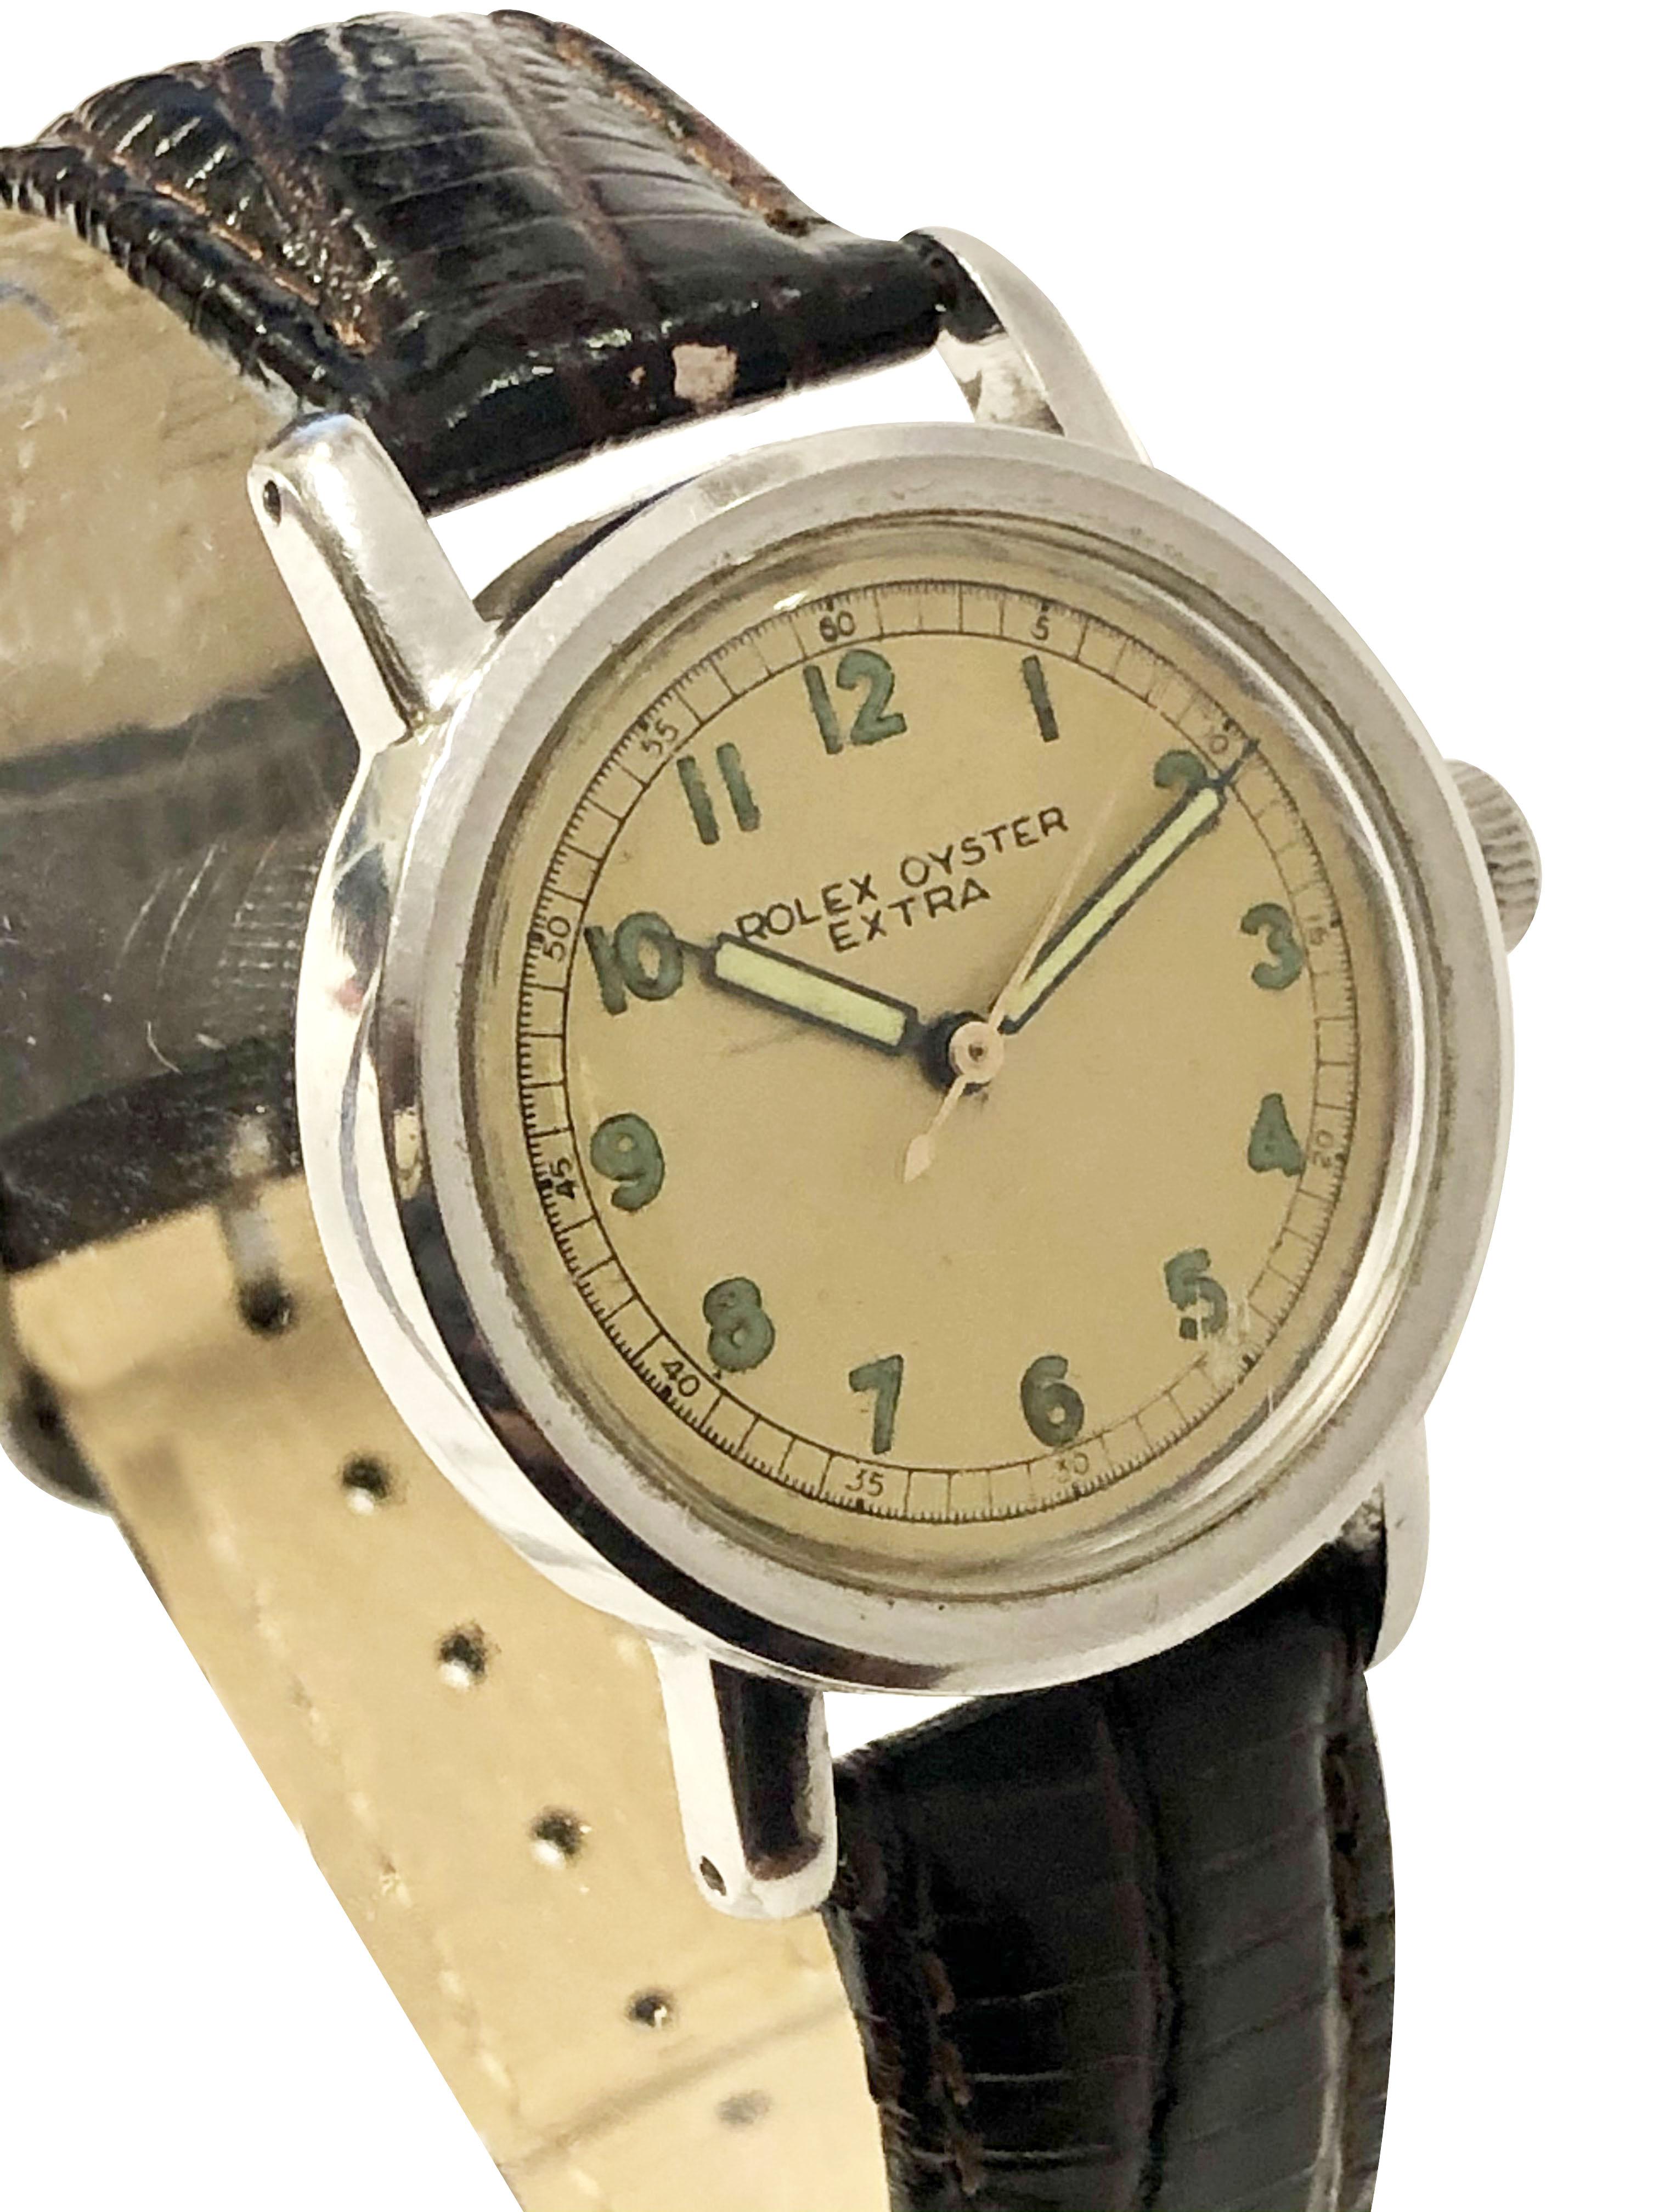 Circa late 1930s Rolex Extra, also known as the Athlete model Wrist Watch, 32 M.M. Stainless Steel 2 piece Water Resistant Oyster Case. 17 Jewel Mechanical, Manual wind movement. we do believe that this dial is original, slight yellowed, off white